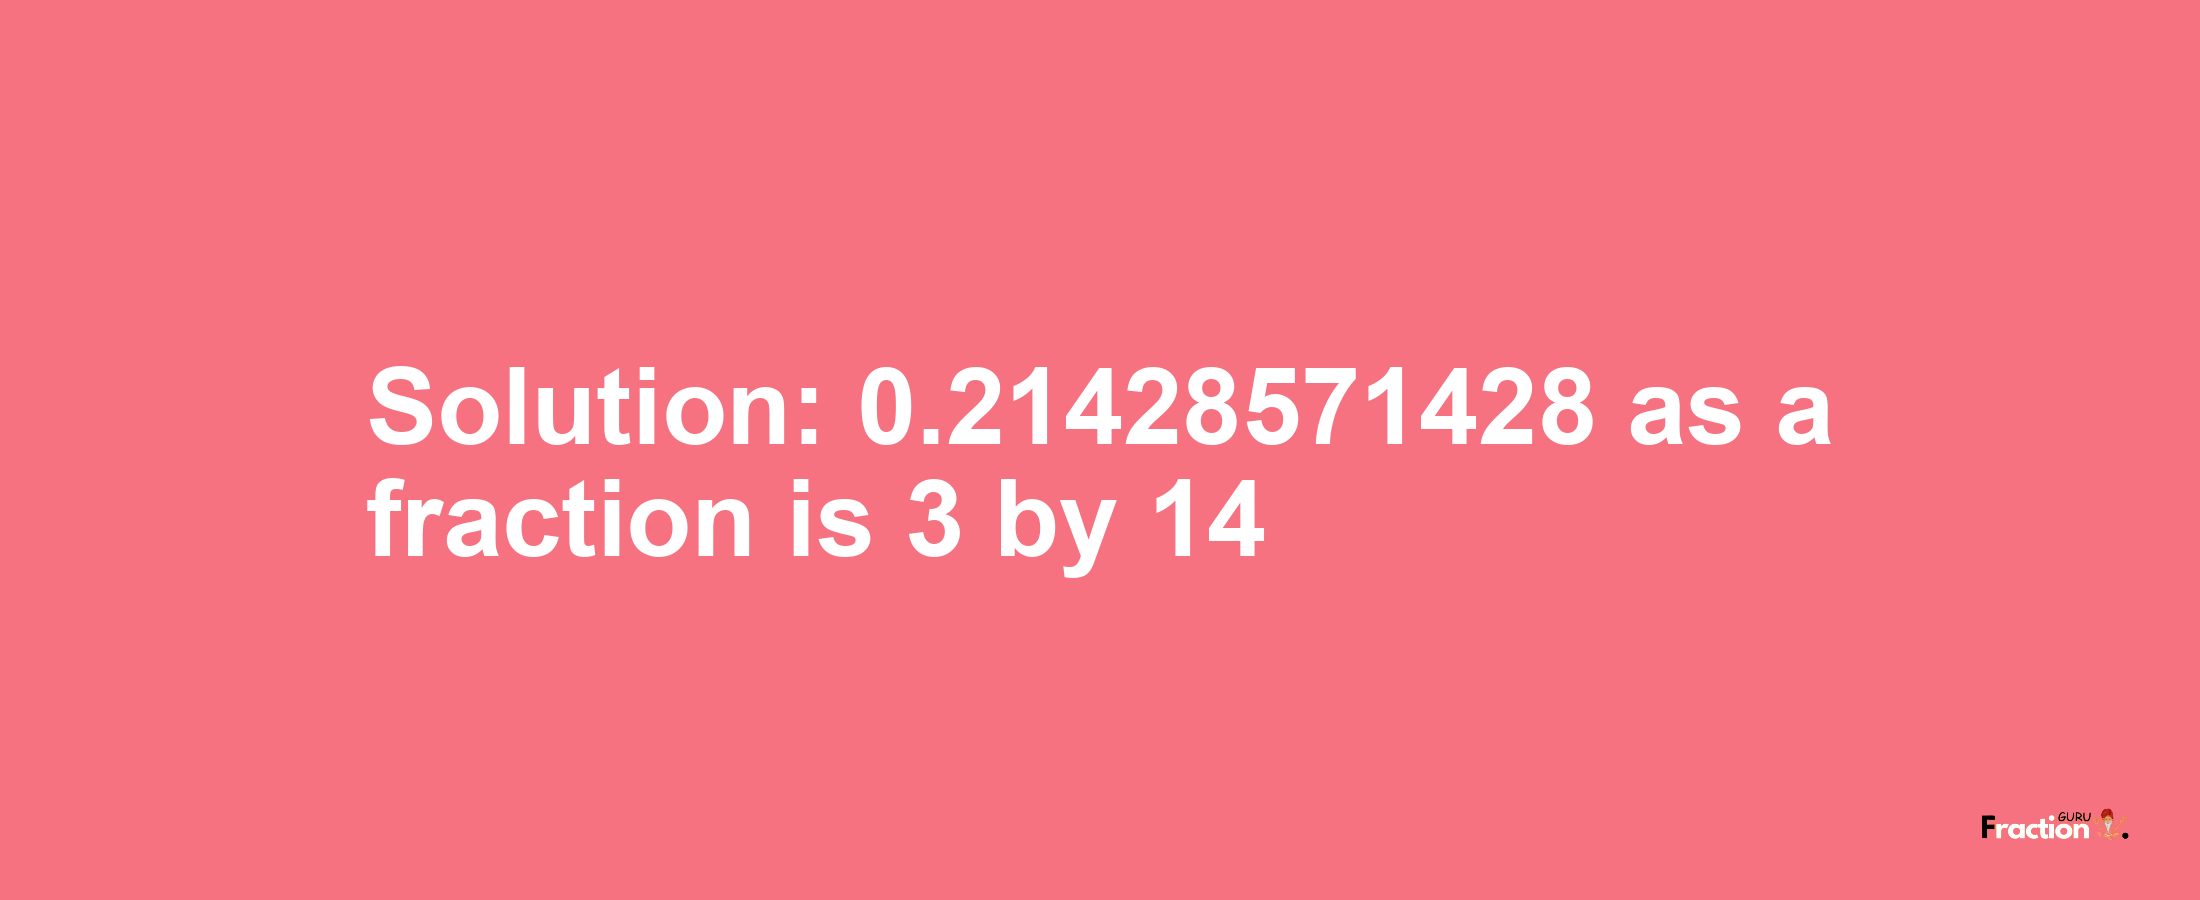 Solution:0.21428571428 as a fraction is 3/14